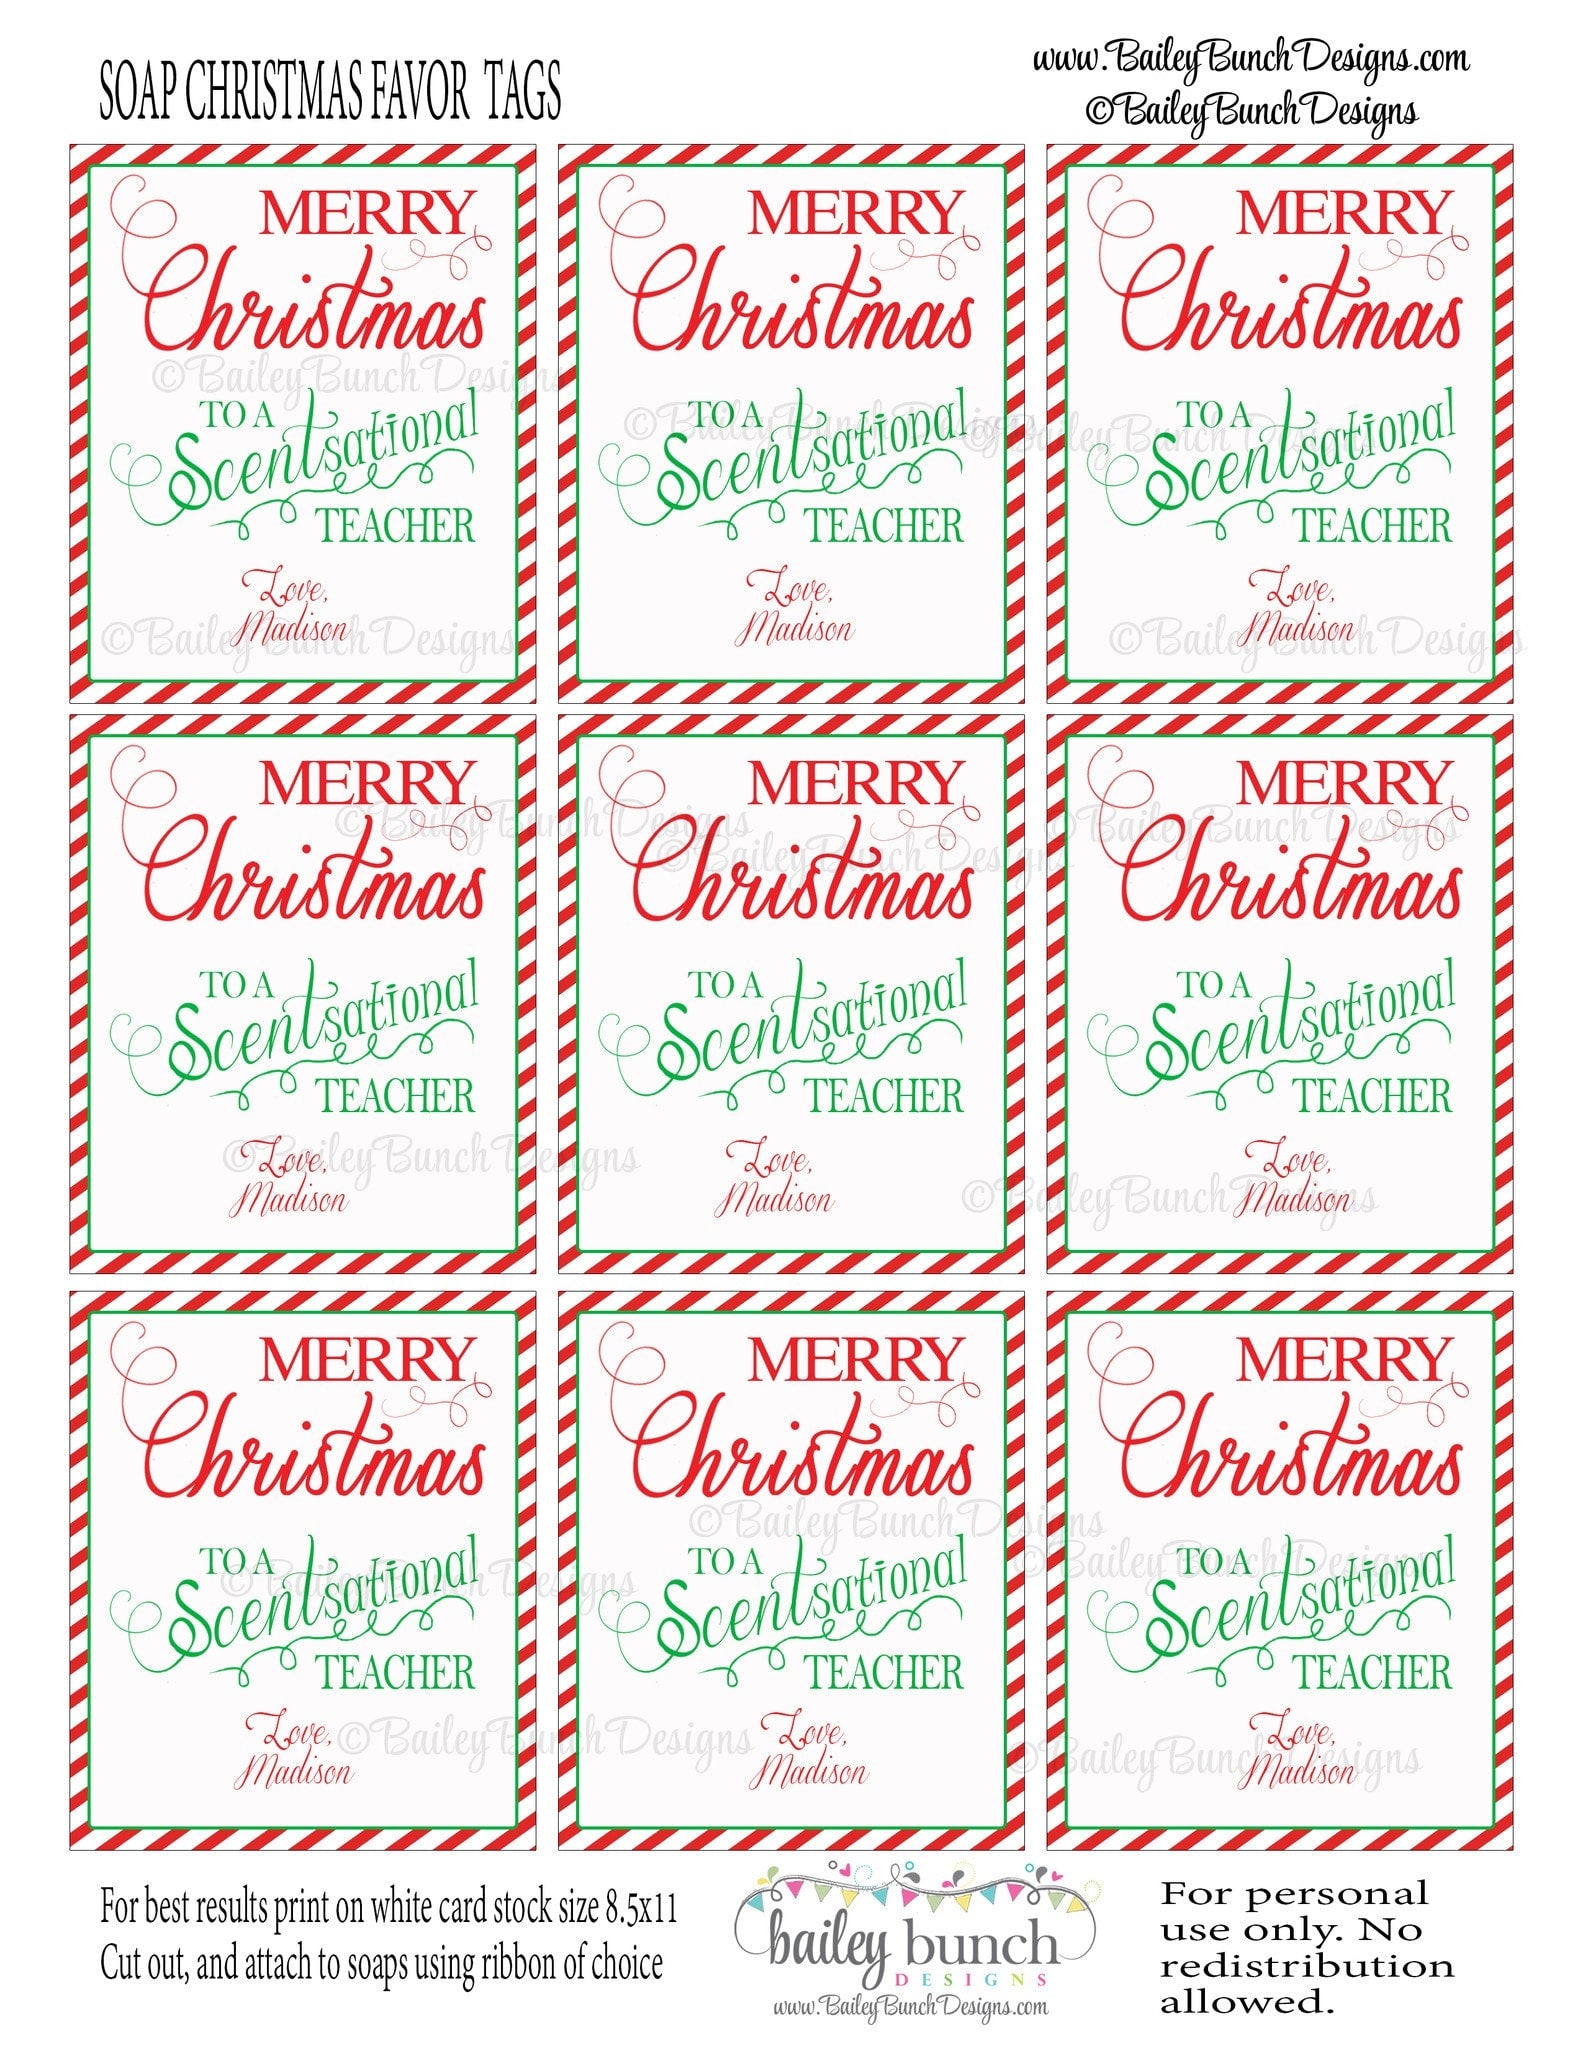 Soap Gift Labels, Teacher Christmas Gift SOAP0520 – Bailey Bunch Designs